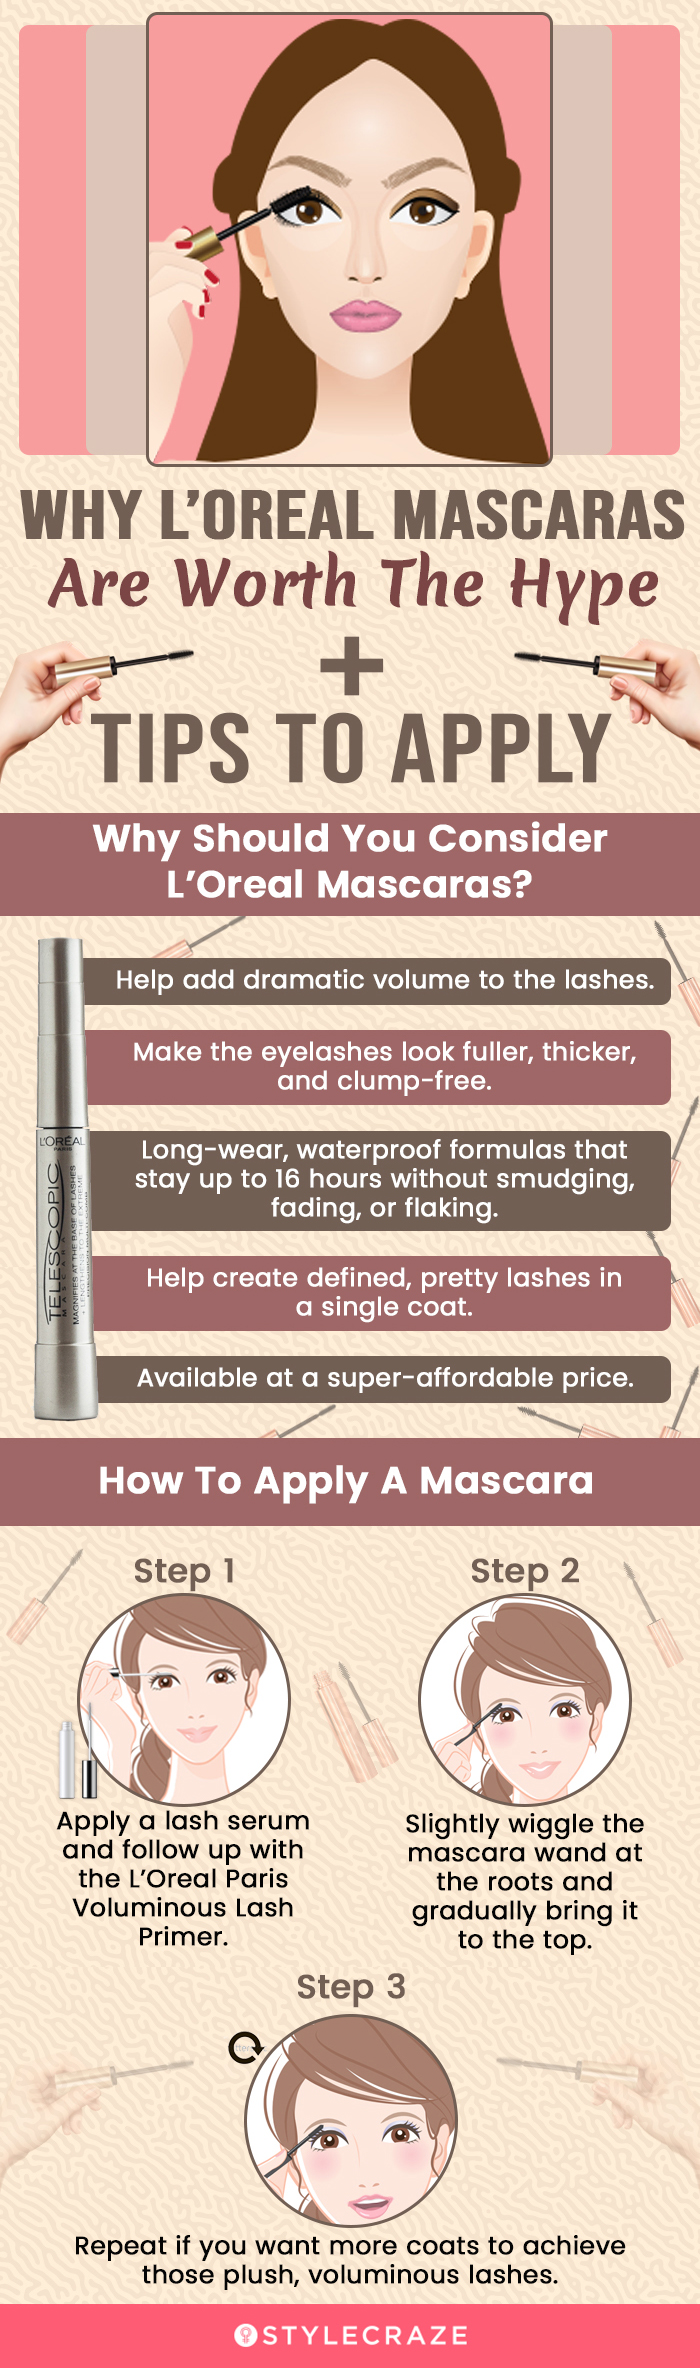 Why L’Oreal Mascara Is Worth Every Bit Of The Hype & How You Can Apply It [infographic]